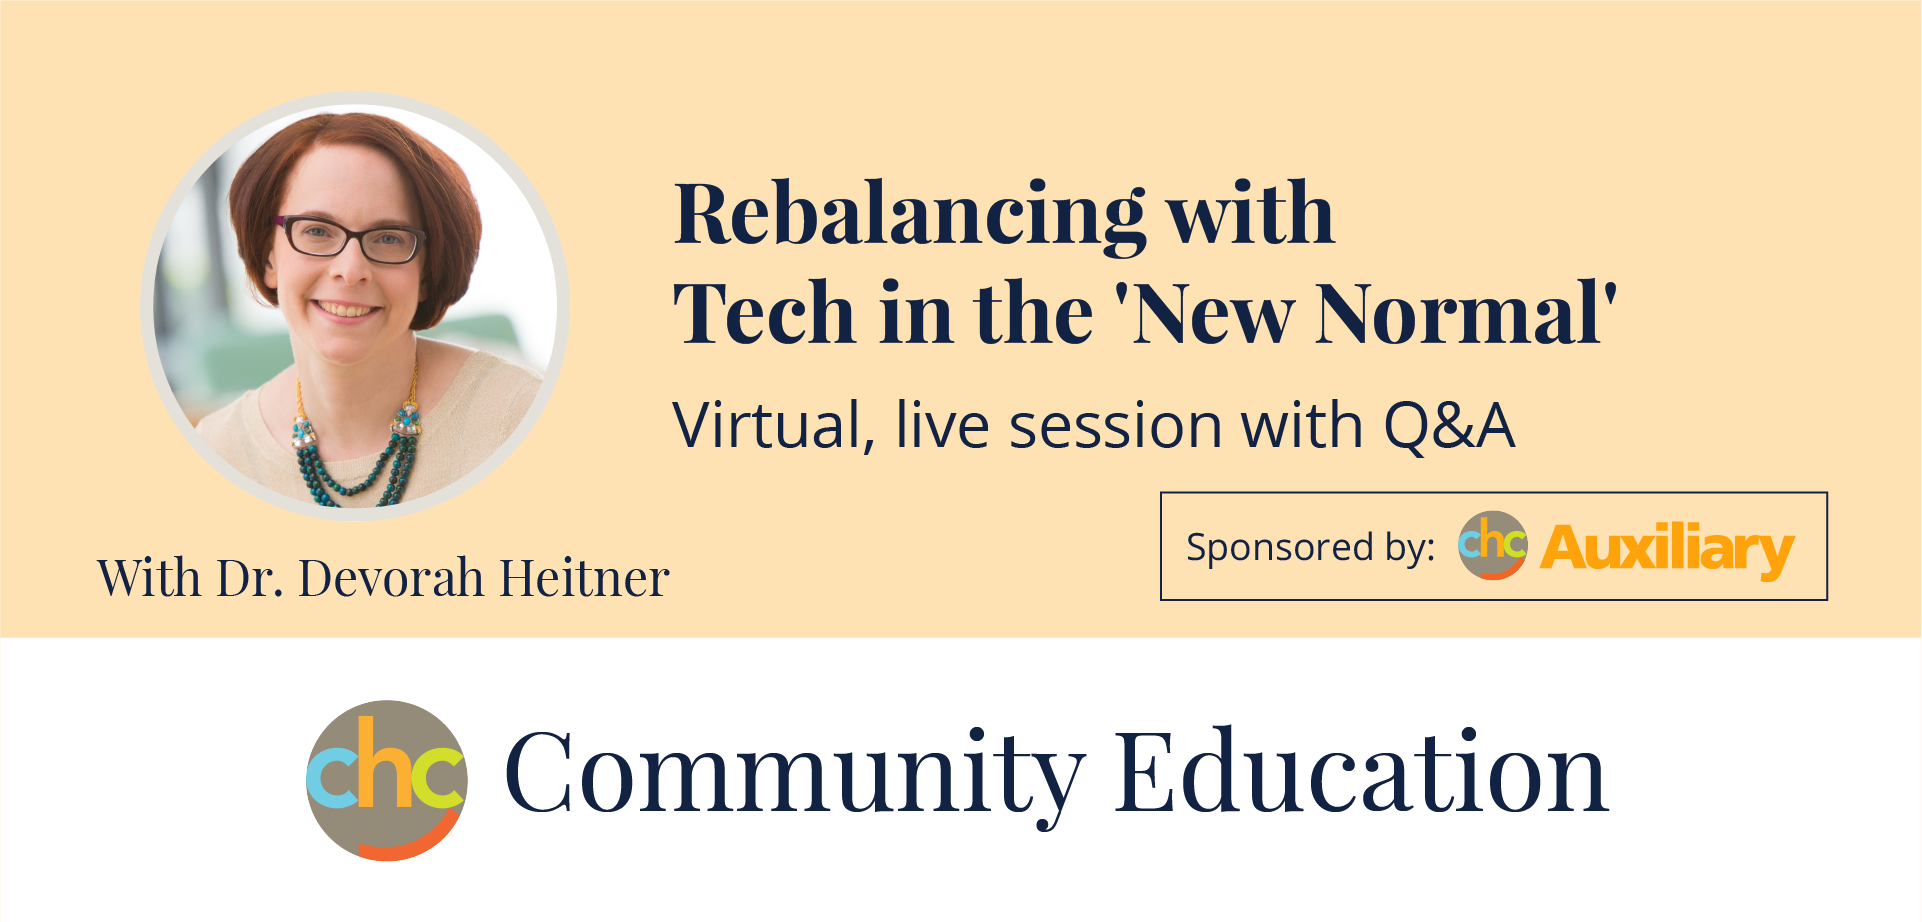 Rebalancing with Tech in the 'New Normal'. Virtual, live session with Q&A. With Dr. Devorah Heitner. Sponsored by CHC Auxiliary. CHC Community Education.